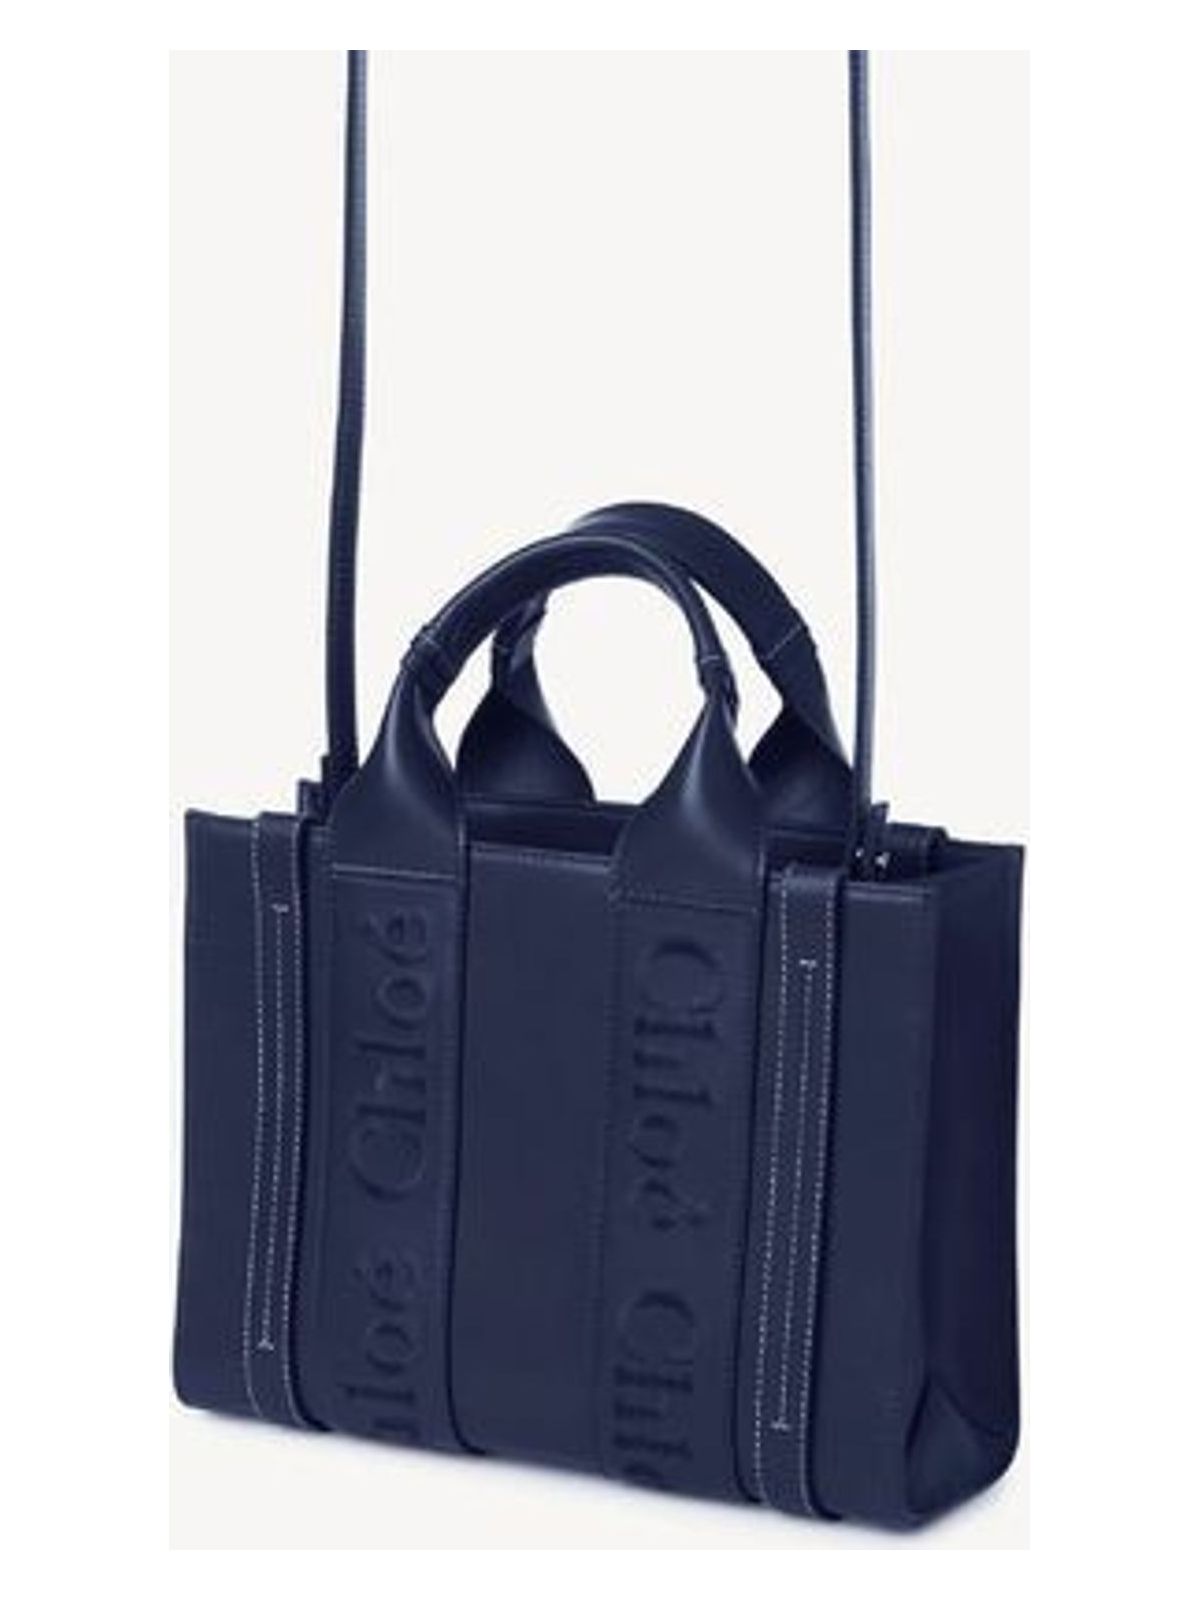 WOODY402 CHLOÉ WOODY SMALL LEATHER TOTE